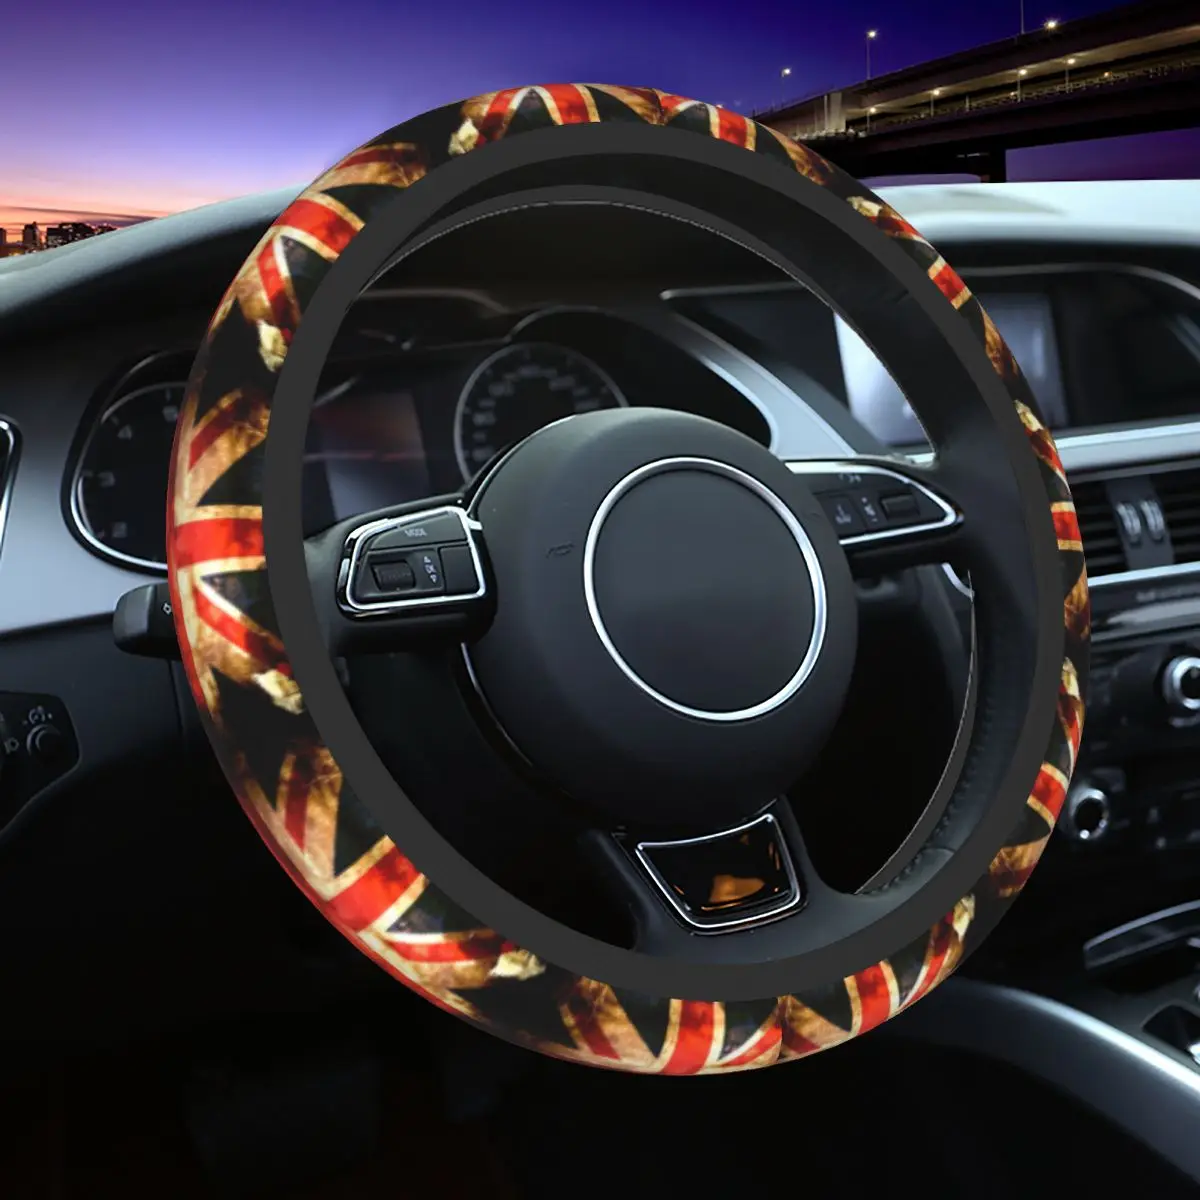 

38cm Steering Wheel Covers Union Grunge Flag Travel Braid On The Steering Wheel Cover Car-styling Elastische Car Accessories